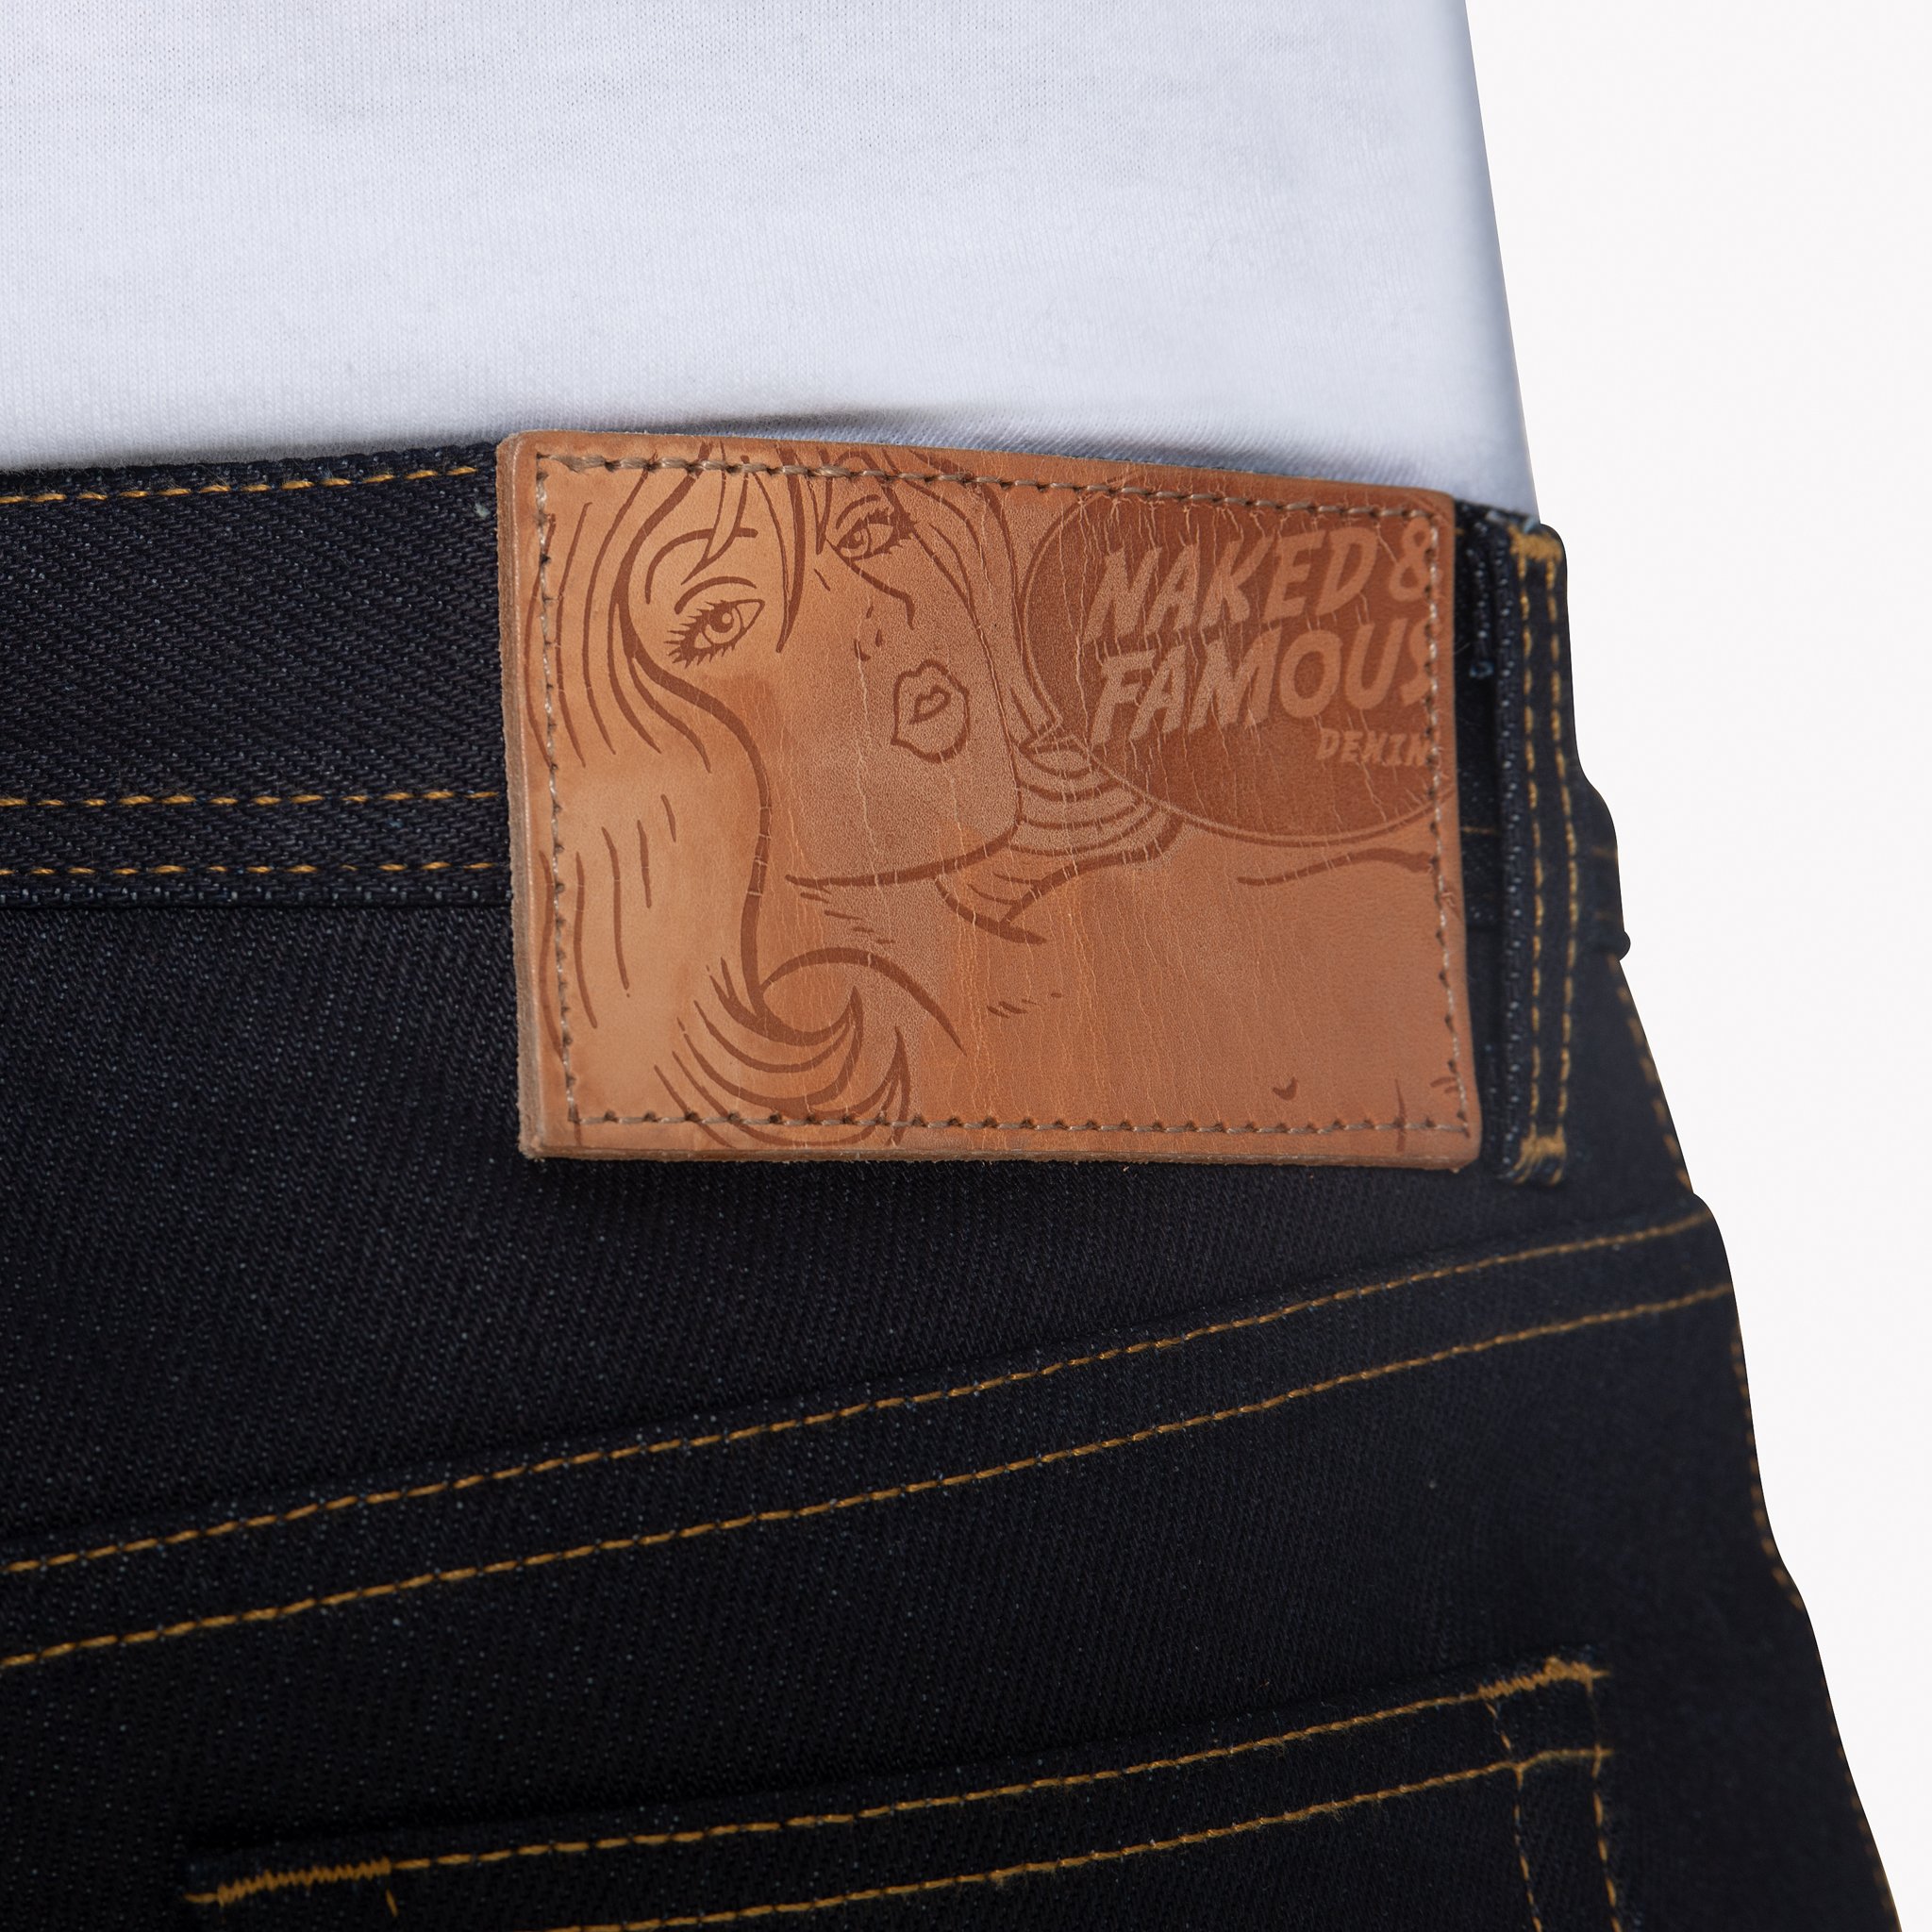  Elephant X S jeans - leather patch 